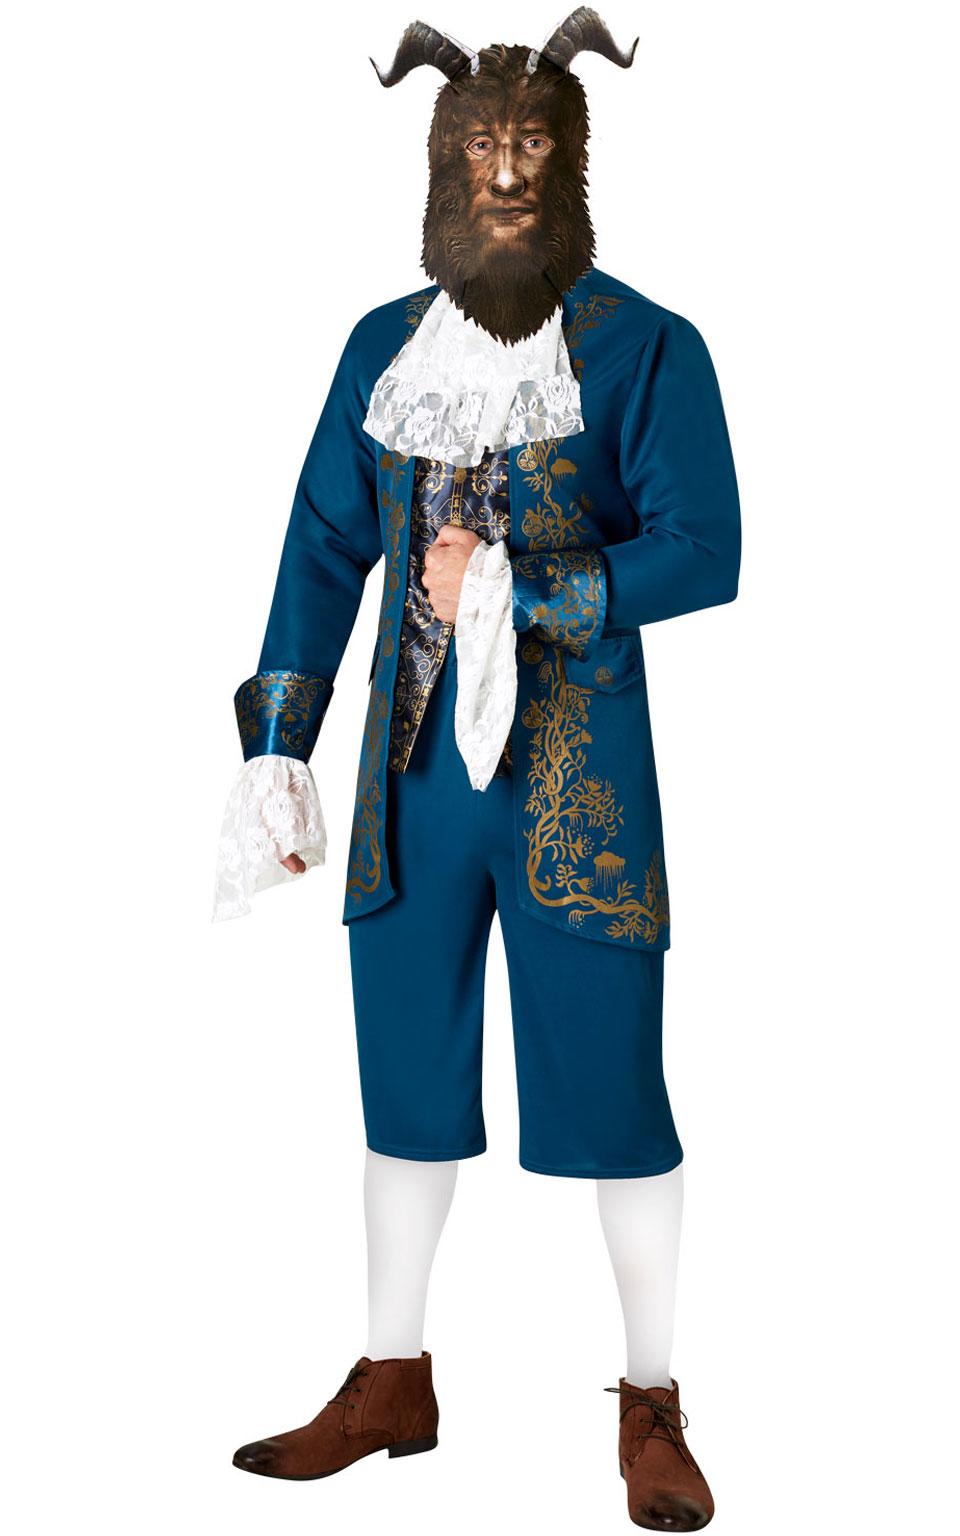 Disneys Beast Adult Fancy Dress Costume by Rubies 820452 available here at Karnival Costumes online party shop